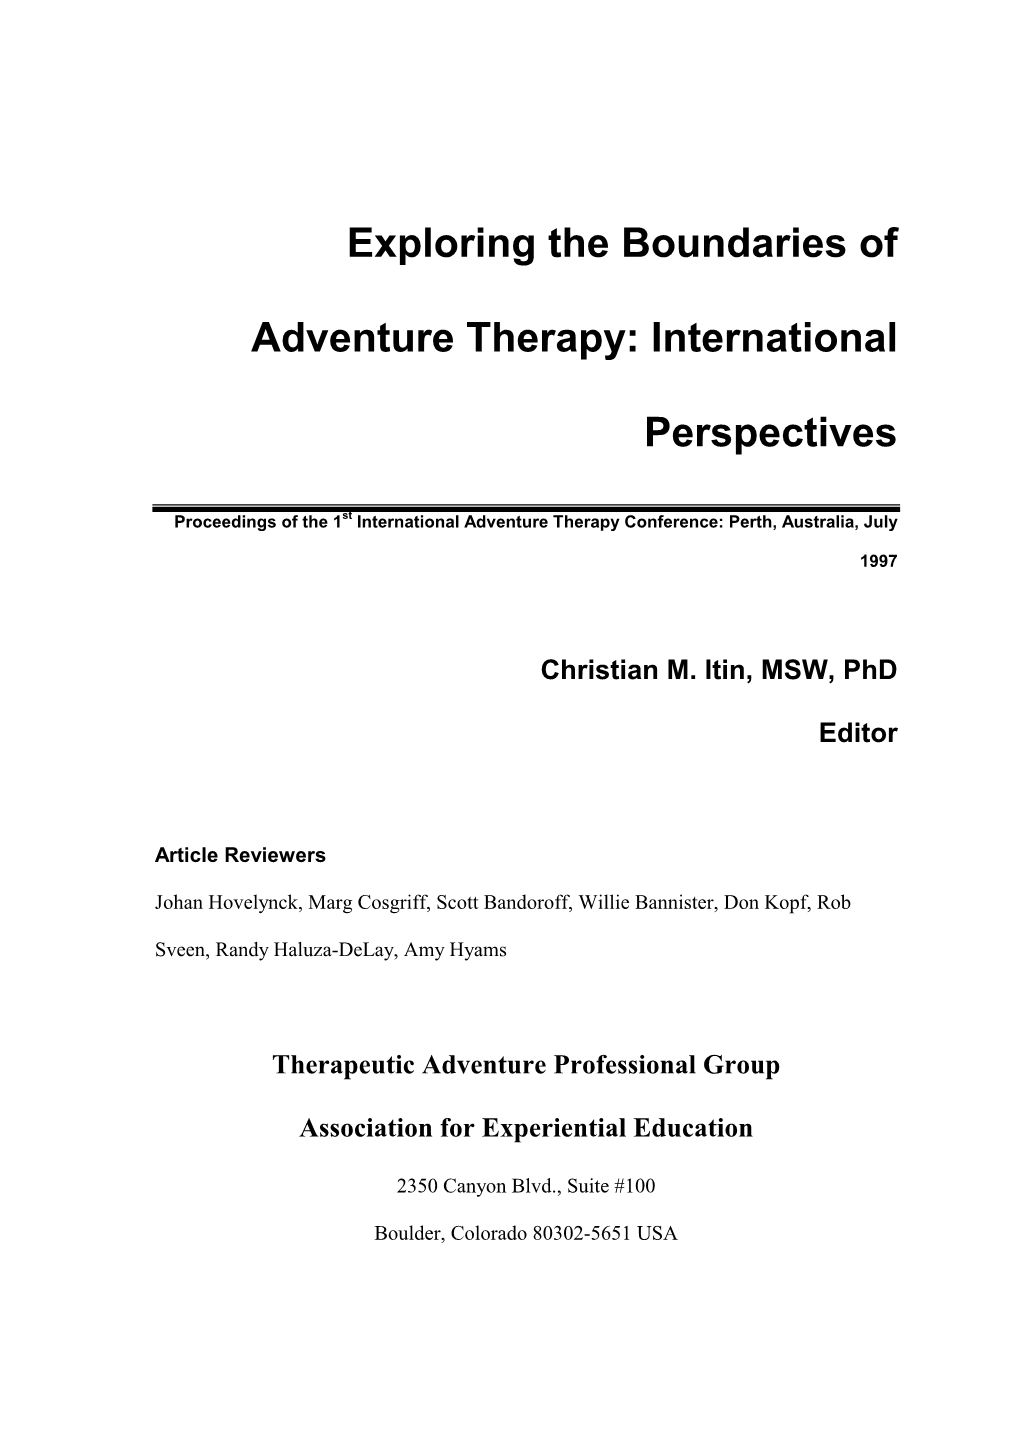 Exploring the Boundaries of Adventure Therapy: International Perspectives, Grows Directly out of the Theme of the Conference